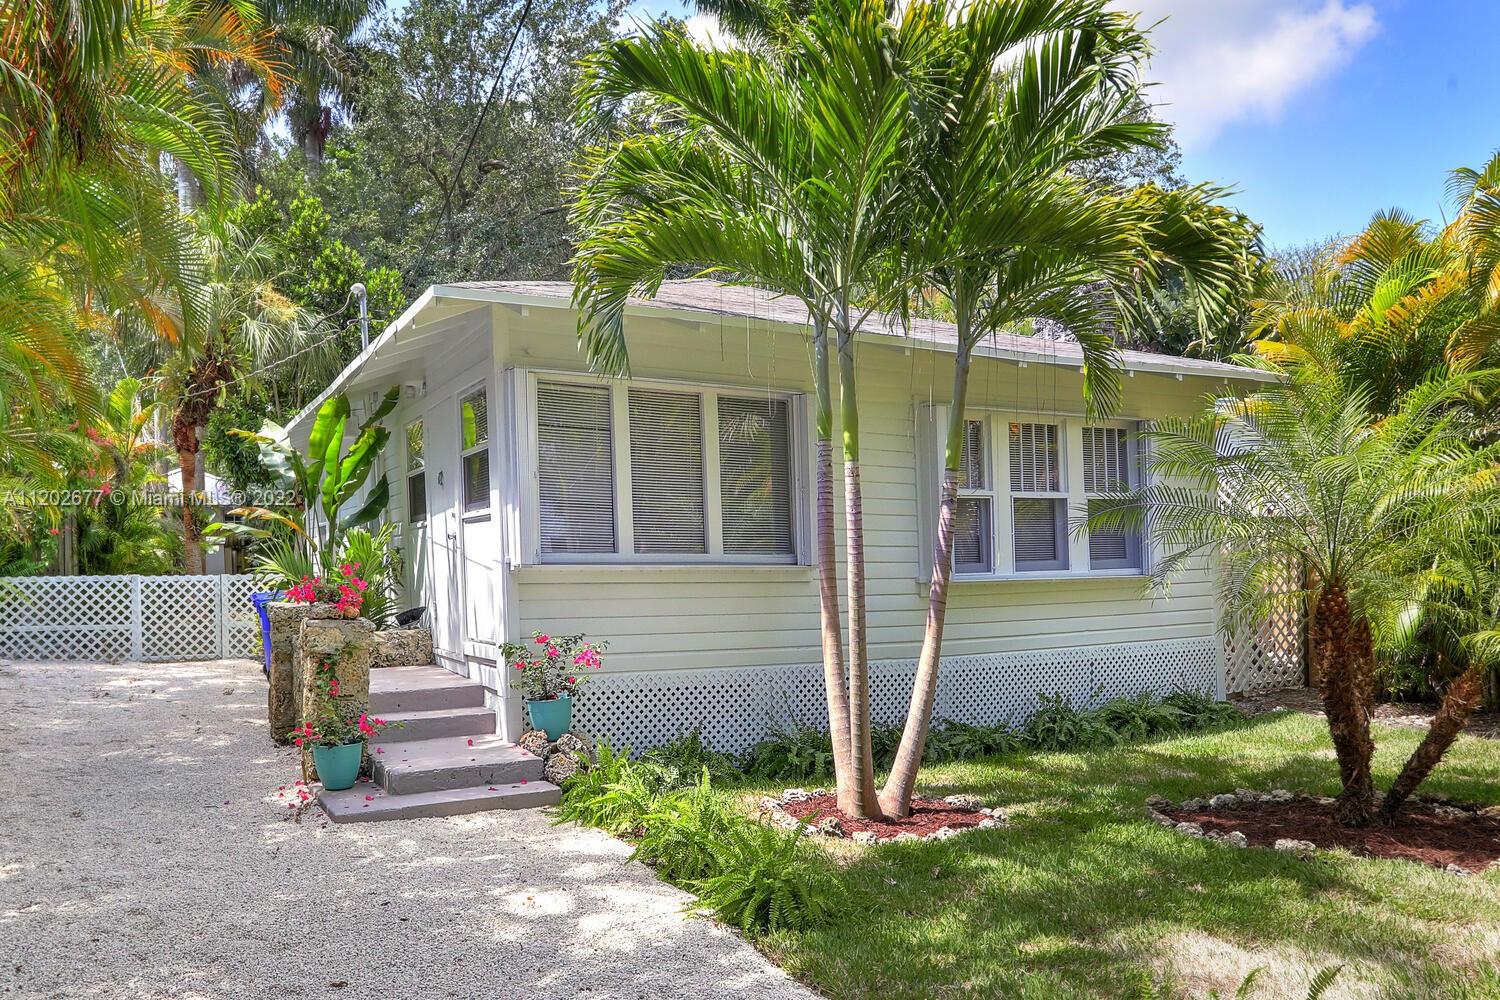 A charming 1925 Key West style cottage on a fantastic street in South Coconut Grove. Walking distance into the quaint village where you can enjoy wonderful restaurants and entertainment. Enjoy the lush landscape with mature trees offering privacy year round. The property is a 2 bedroom 1 bath cottage.